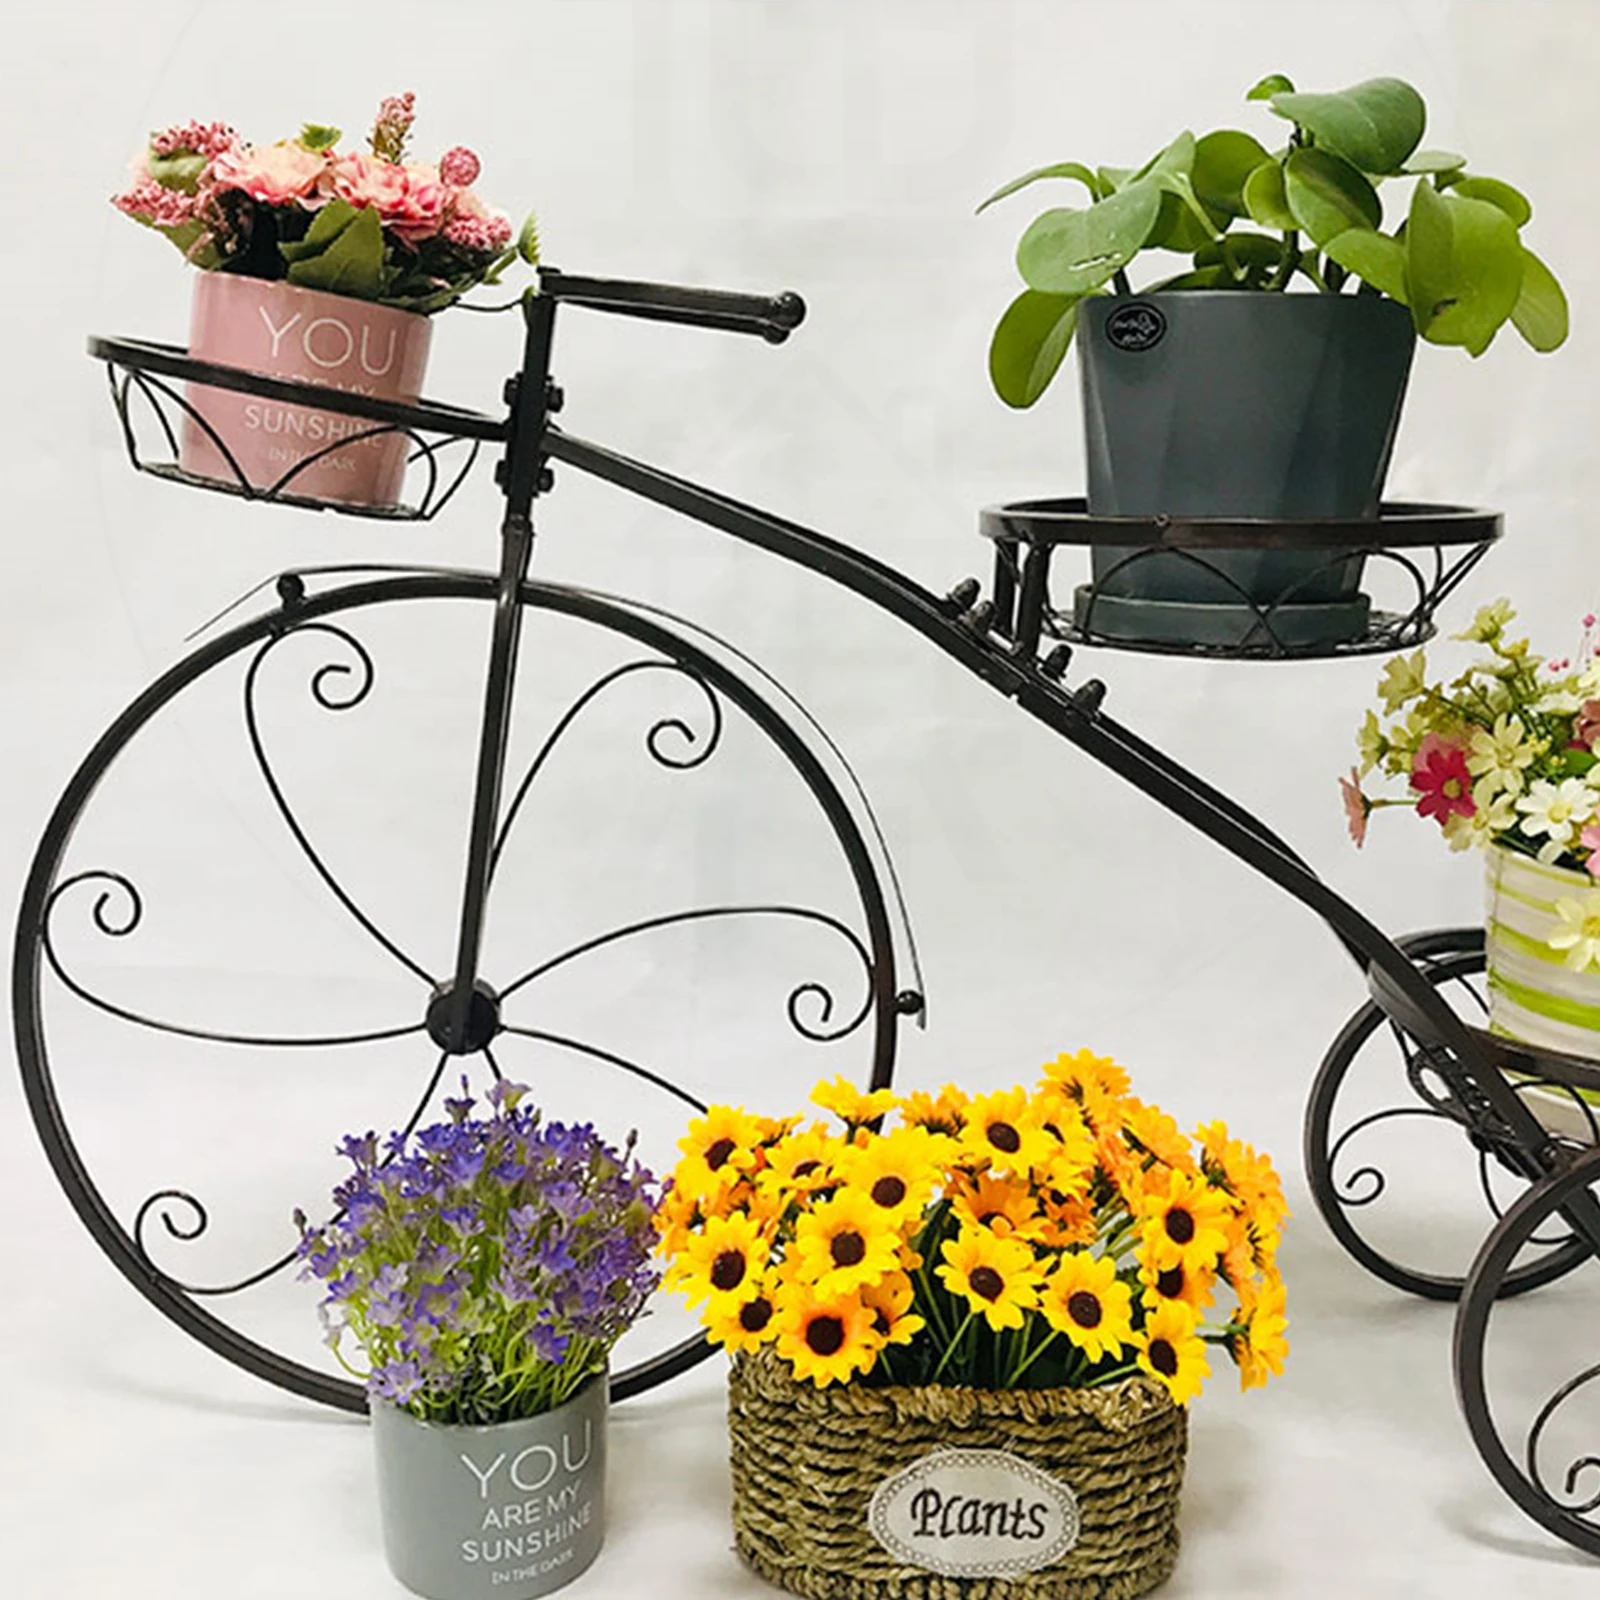 Tricycle flower stand Plant Stand Bicycle Flower Pot  Holder Rack for Home Garden Patio Decoration plant flower display stand indoor backdrop stand for garden balcony patio lawn home decoration 2pcs 6layers half moon iron wood